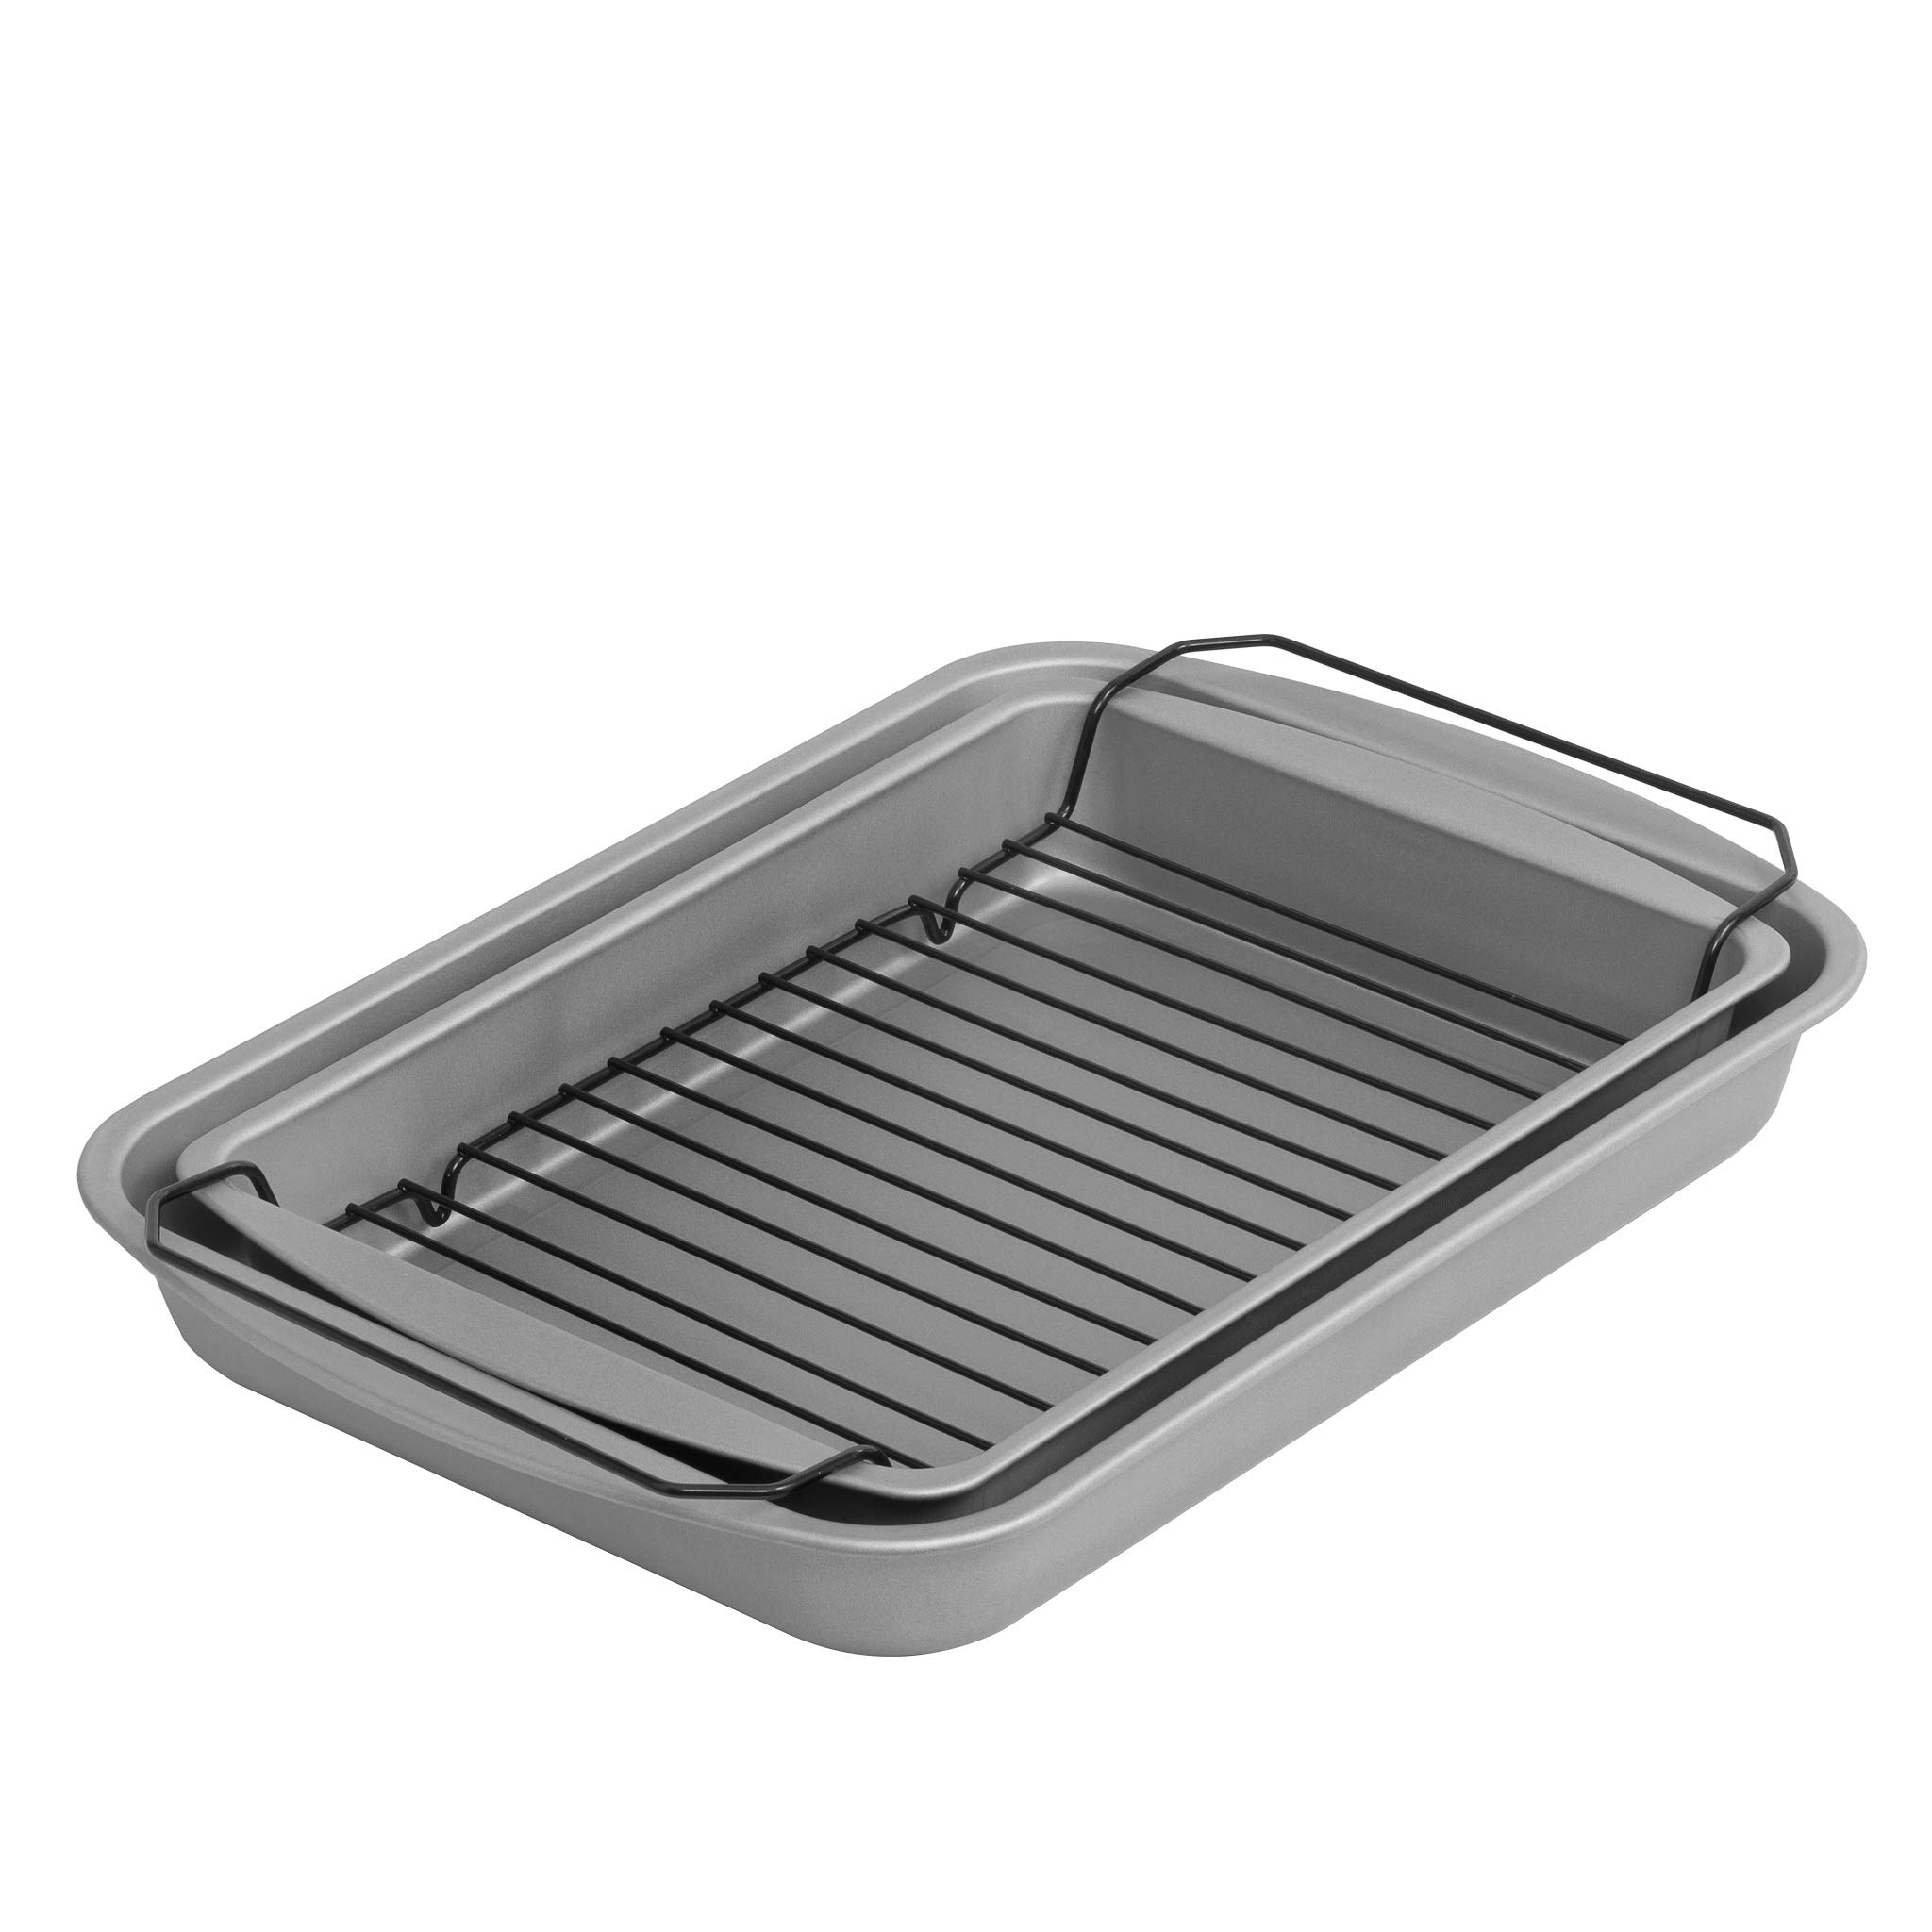 G & S Metal Products Company OvenStuff Non-Stick Baking, Roasting Pan Chrome Broiler Rack, 3-Piece Set, Grey